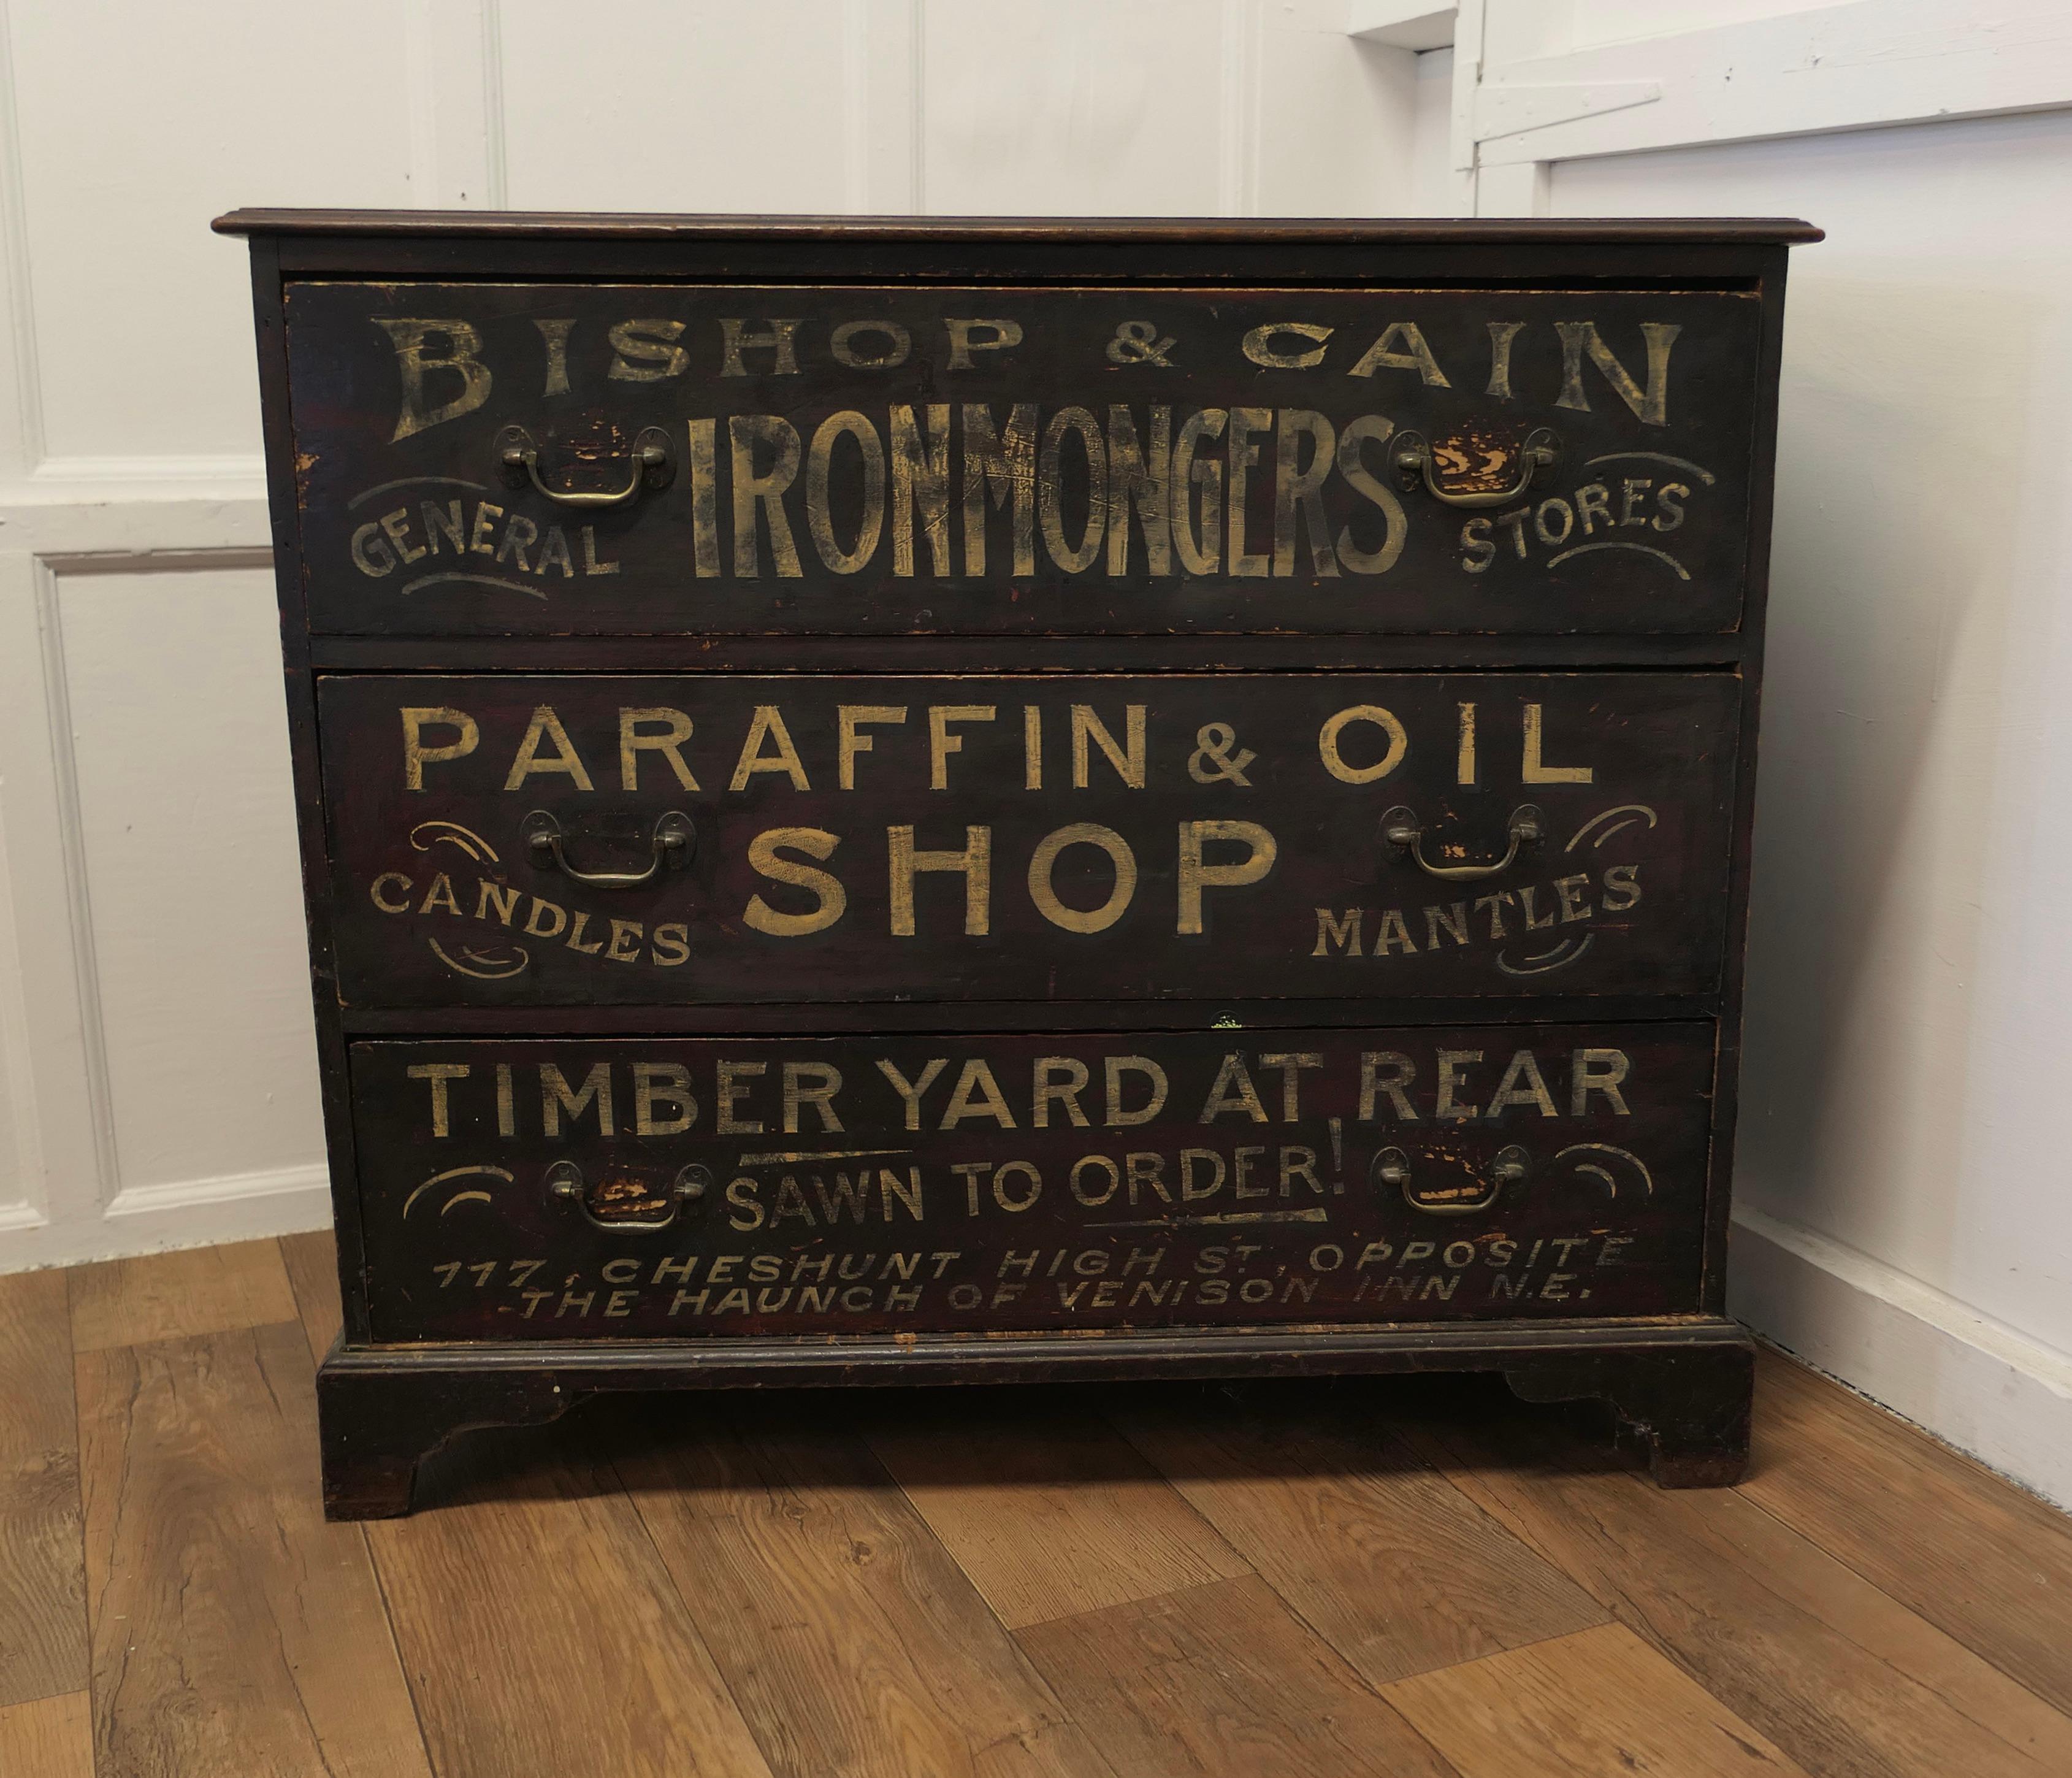 Painted Pine Chest of Drawers, Advertising Bishop and Cain Ironmongers

This is a great decorative piece, it is a 19th Century 3 drawer chest of drawers from England
It has 20th century Lettering painted on the front advertising Everything from